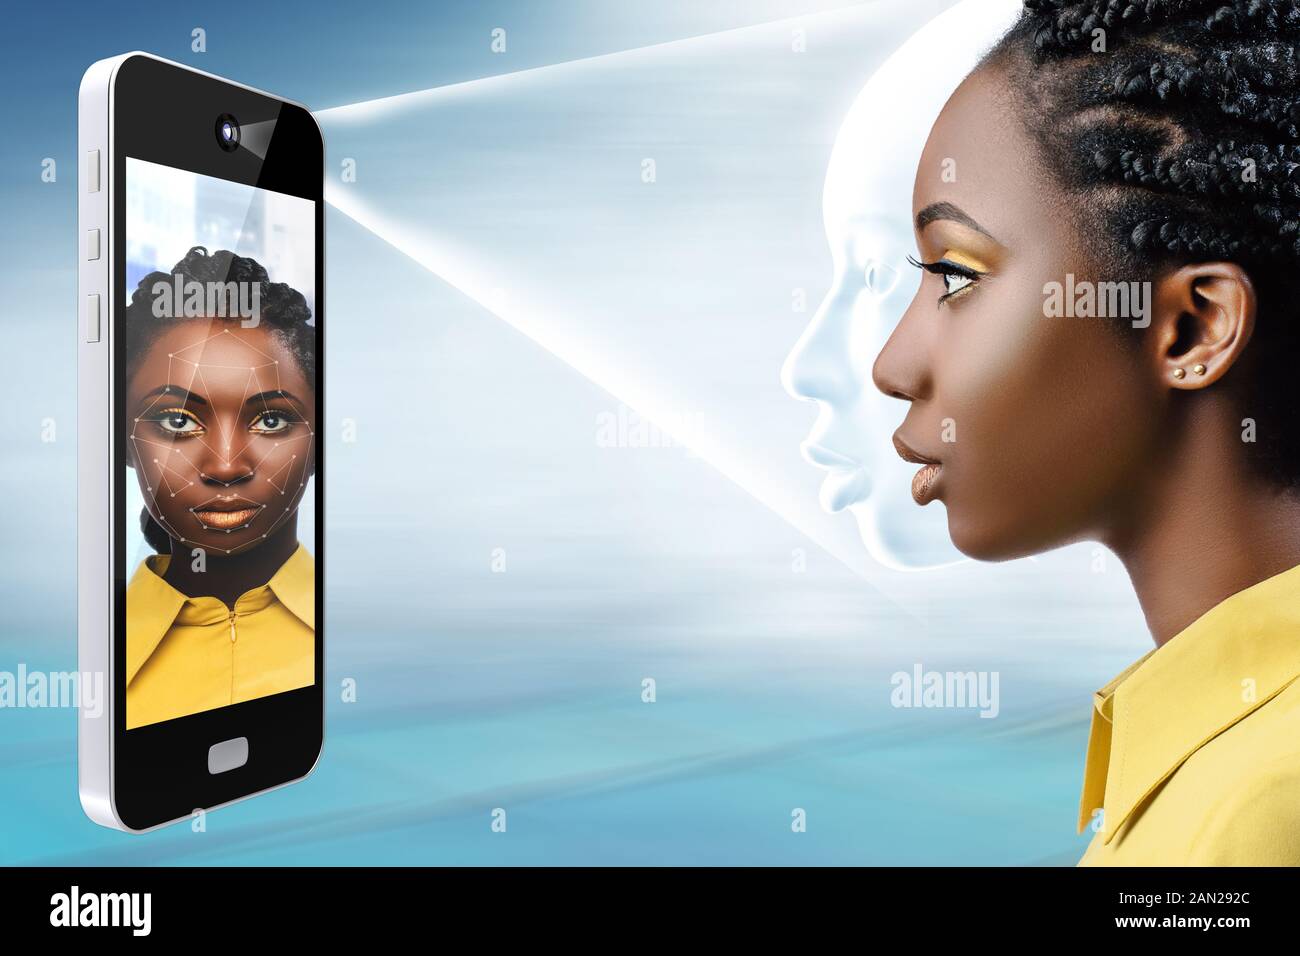 Smart phone projecting light bean on african female face.Side view of conceptual face recognition technology. Stock Photo